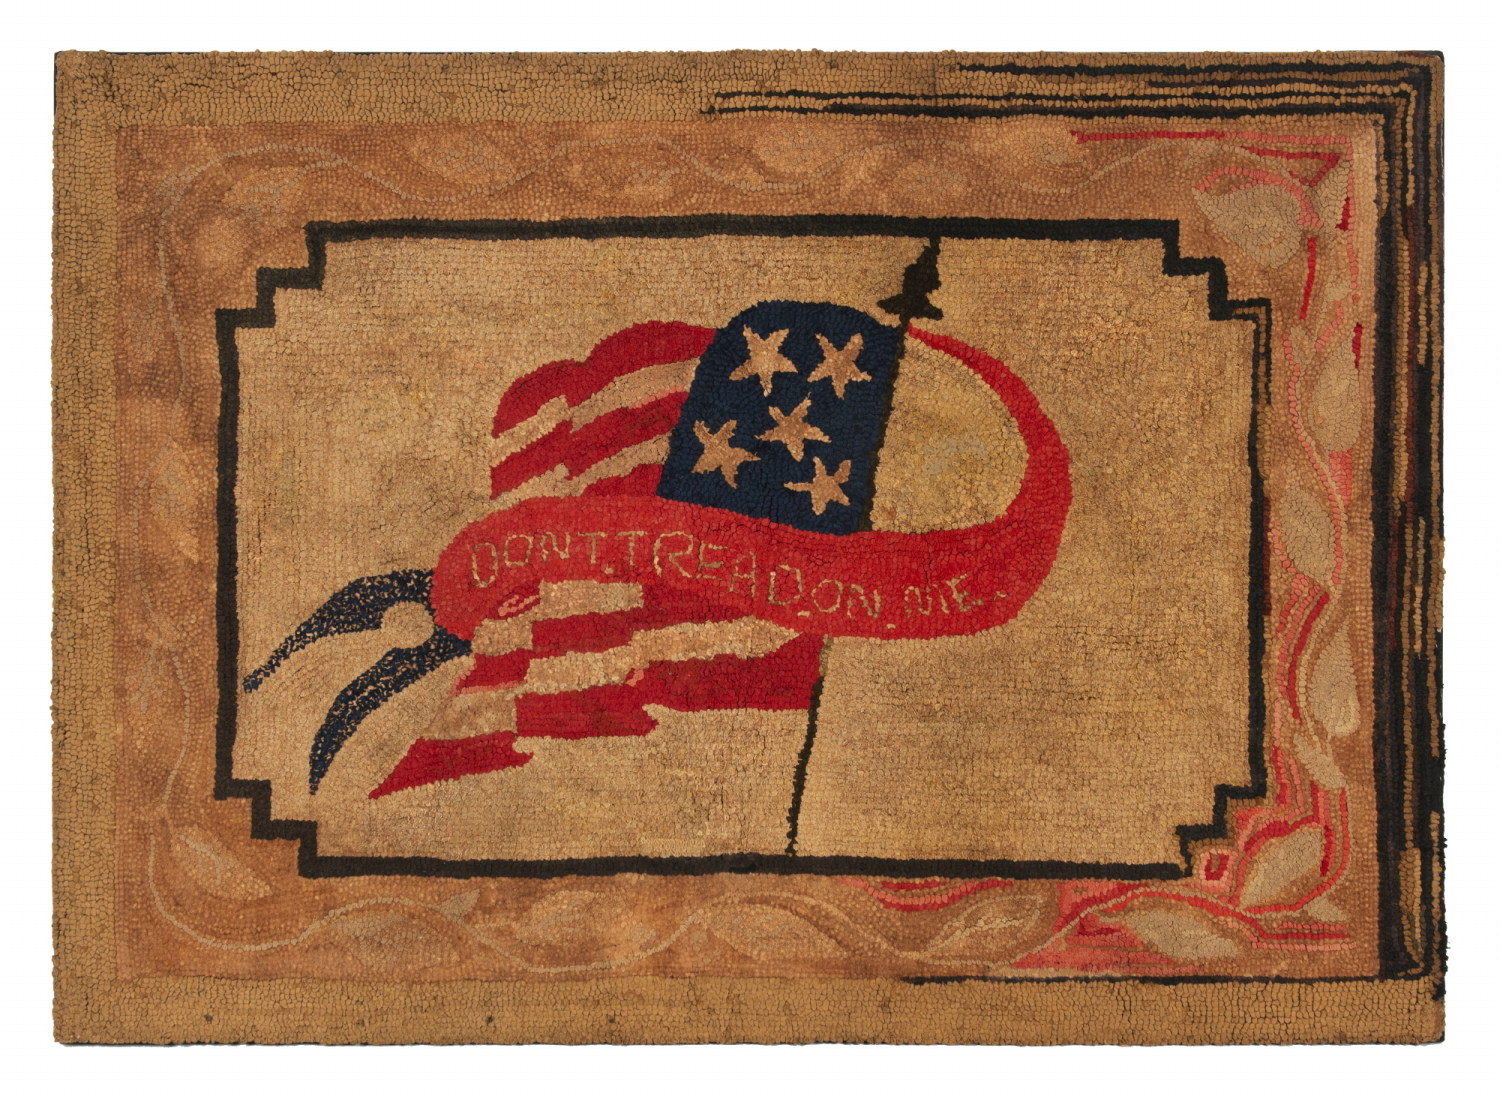 WOOL HOOKED RUG WITH A BILLOWING AMERICAN FLAG AND A FORKED TAIL STREAMER WITH THE “DON’T TREAD ON ME” SLOGAN; made Circa 1880-1910; THE 5 STAR COUNT, IF PURPOSEFUL, WOULD CELEBRATE THE NUMBER OF STATES THAT AFFORDED WOMEN THE RIGHT TO VOTE; EX-AMERICA HURRAH, ILLUSTRATED IN THEIR 1975 BOOK “HOOKED & SEWN RUGS”